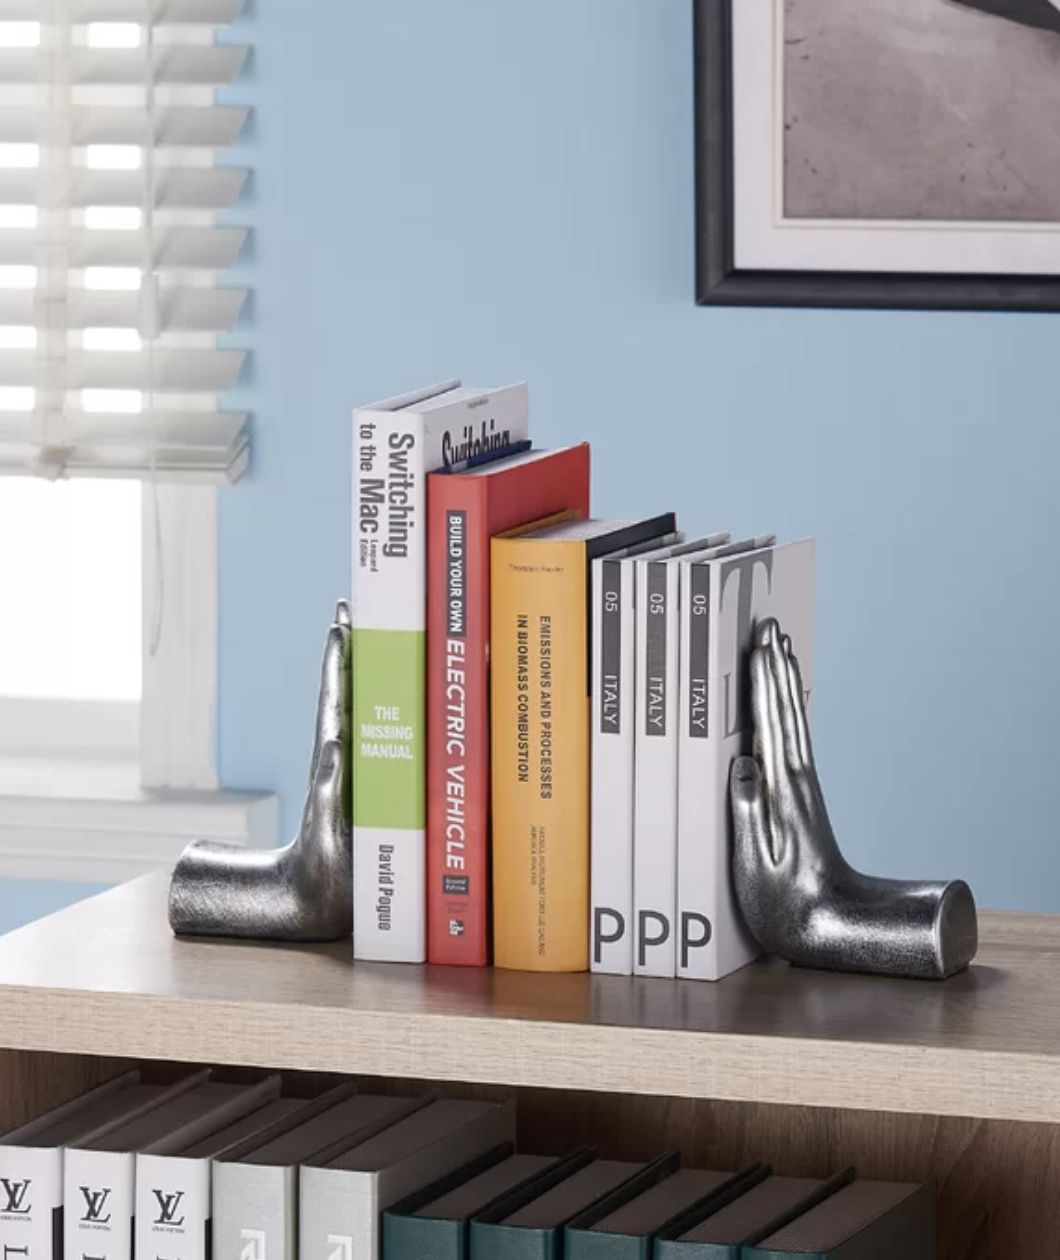 Decorative bookends shaped like hands supporting a row of books on a shelf